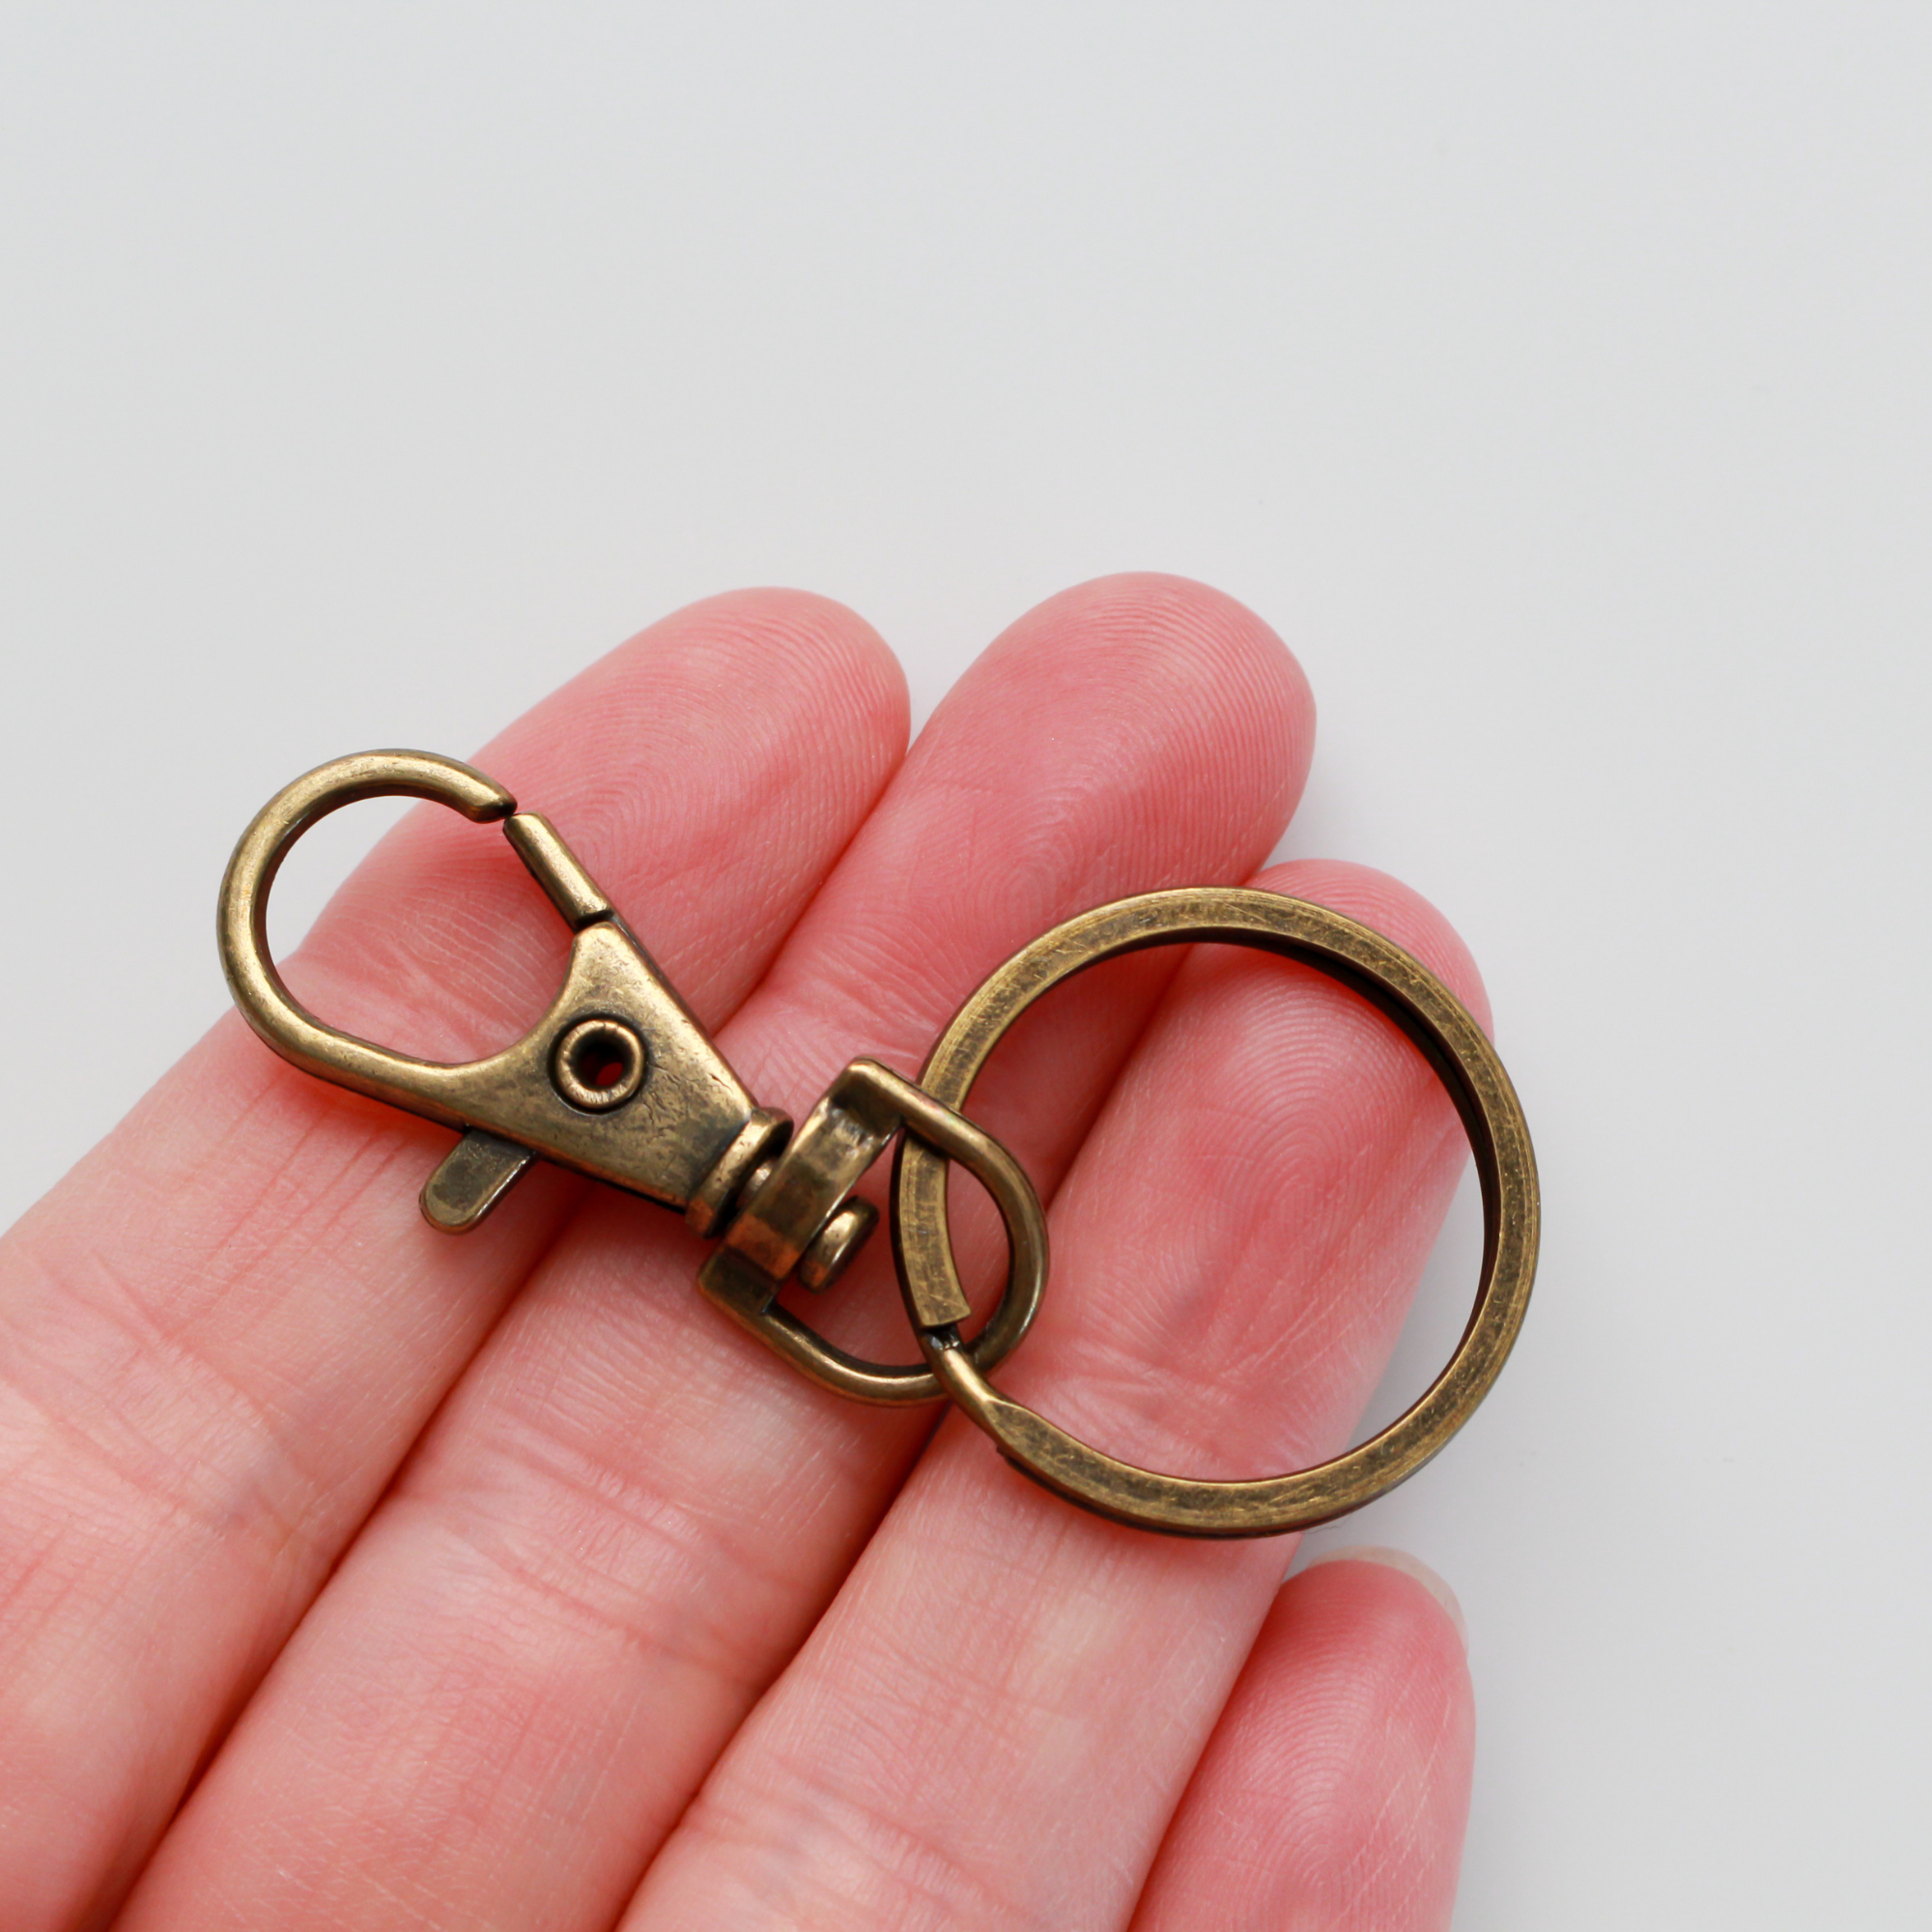 Key ring with lobster claw clasp and swivel eyelets, antique brass, 2pcs